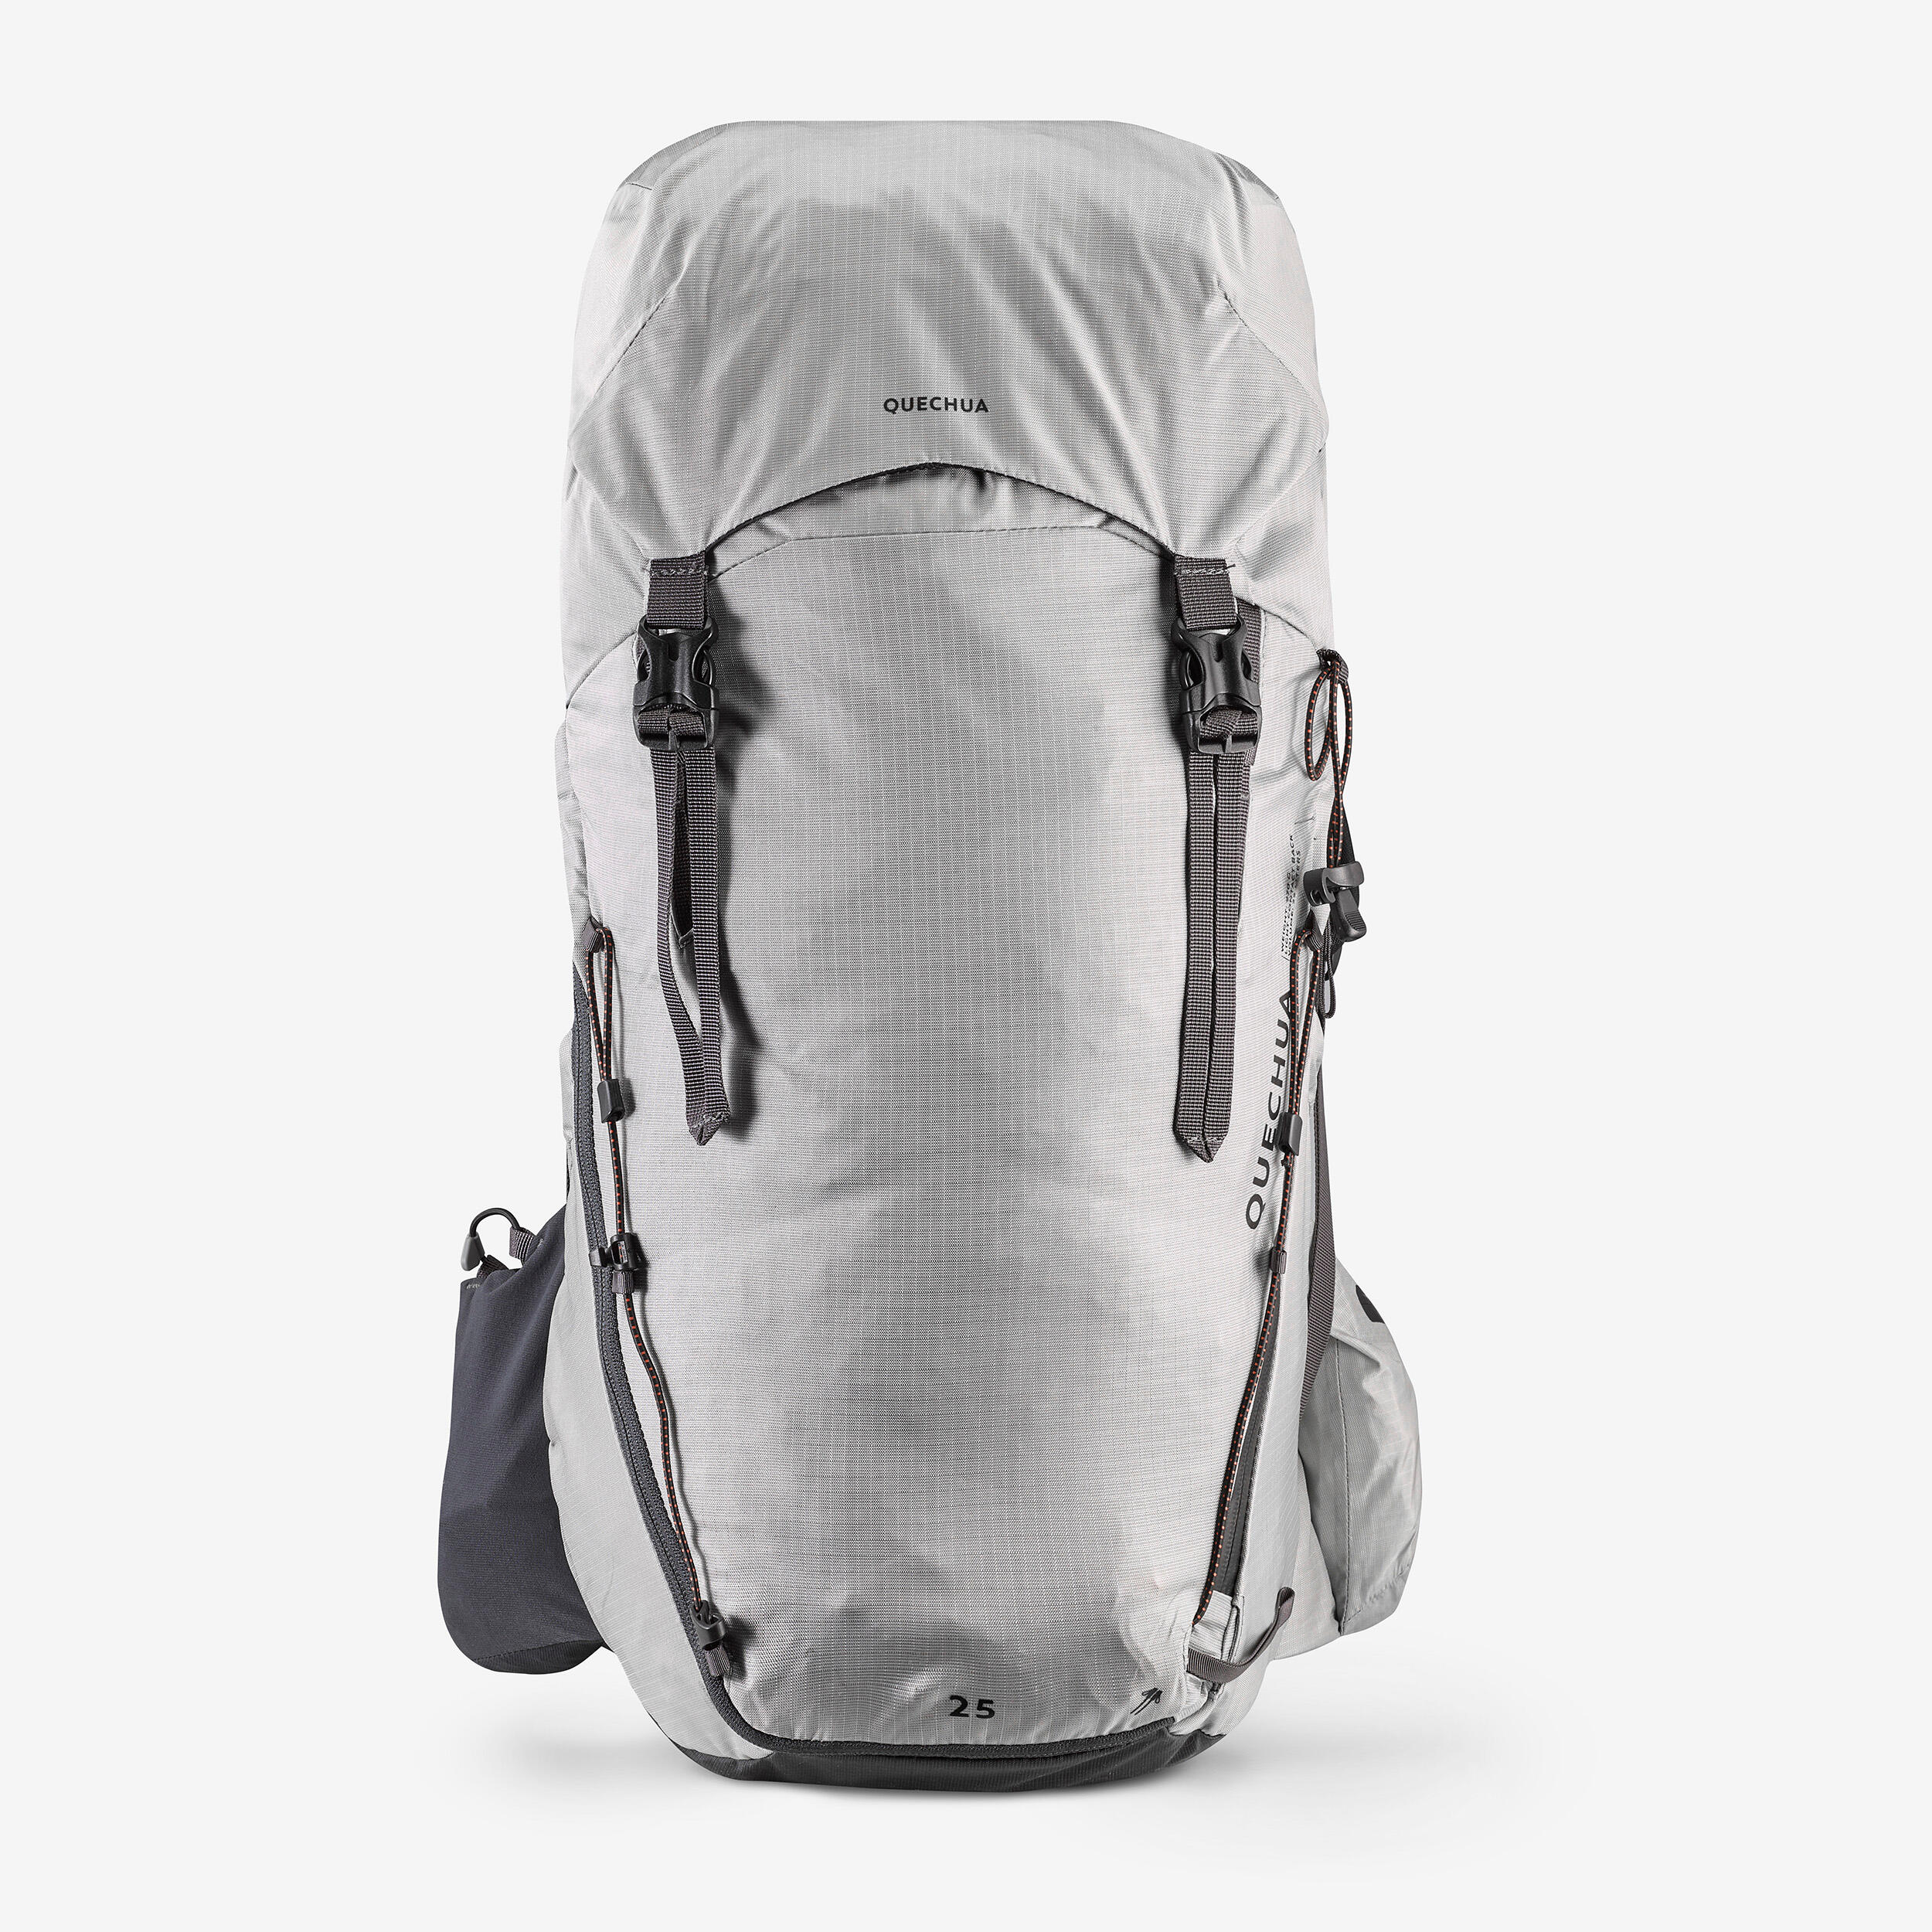 Mountain hiking backpack 25L - MH900 17/18